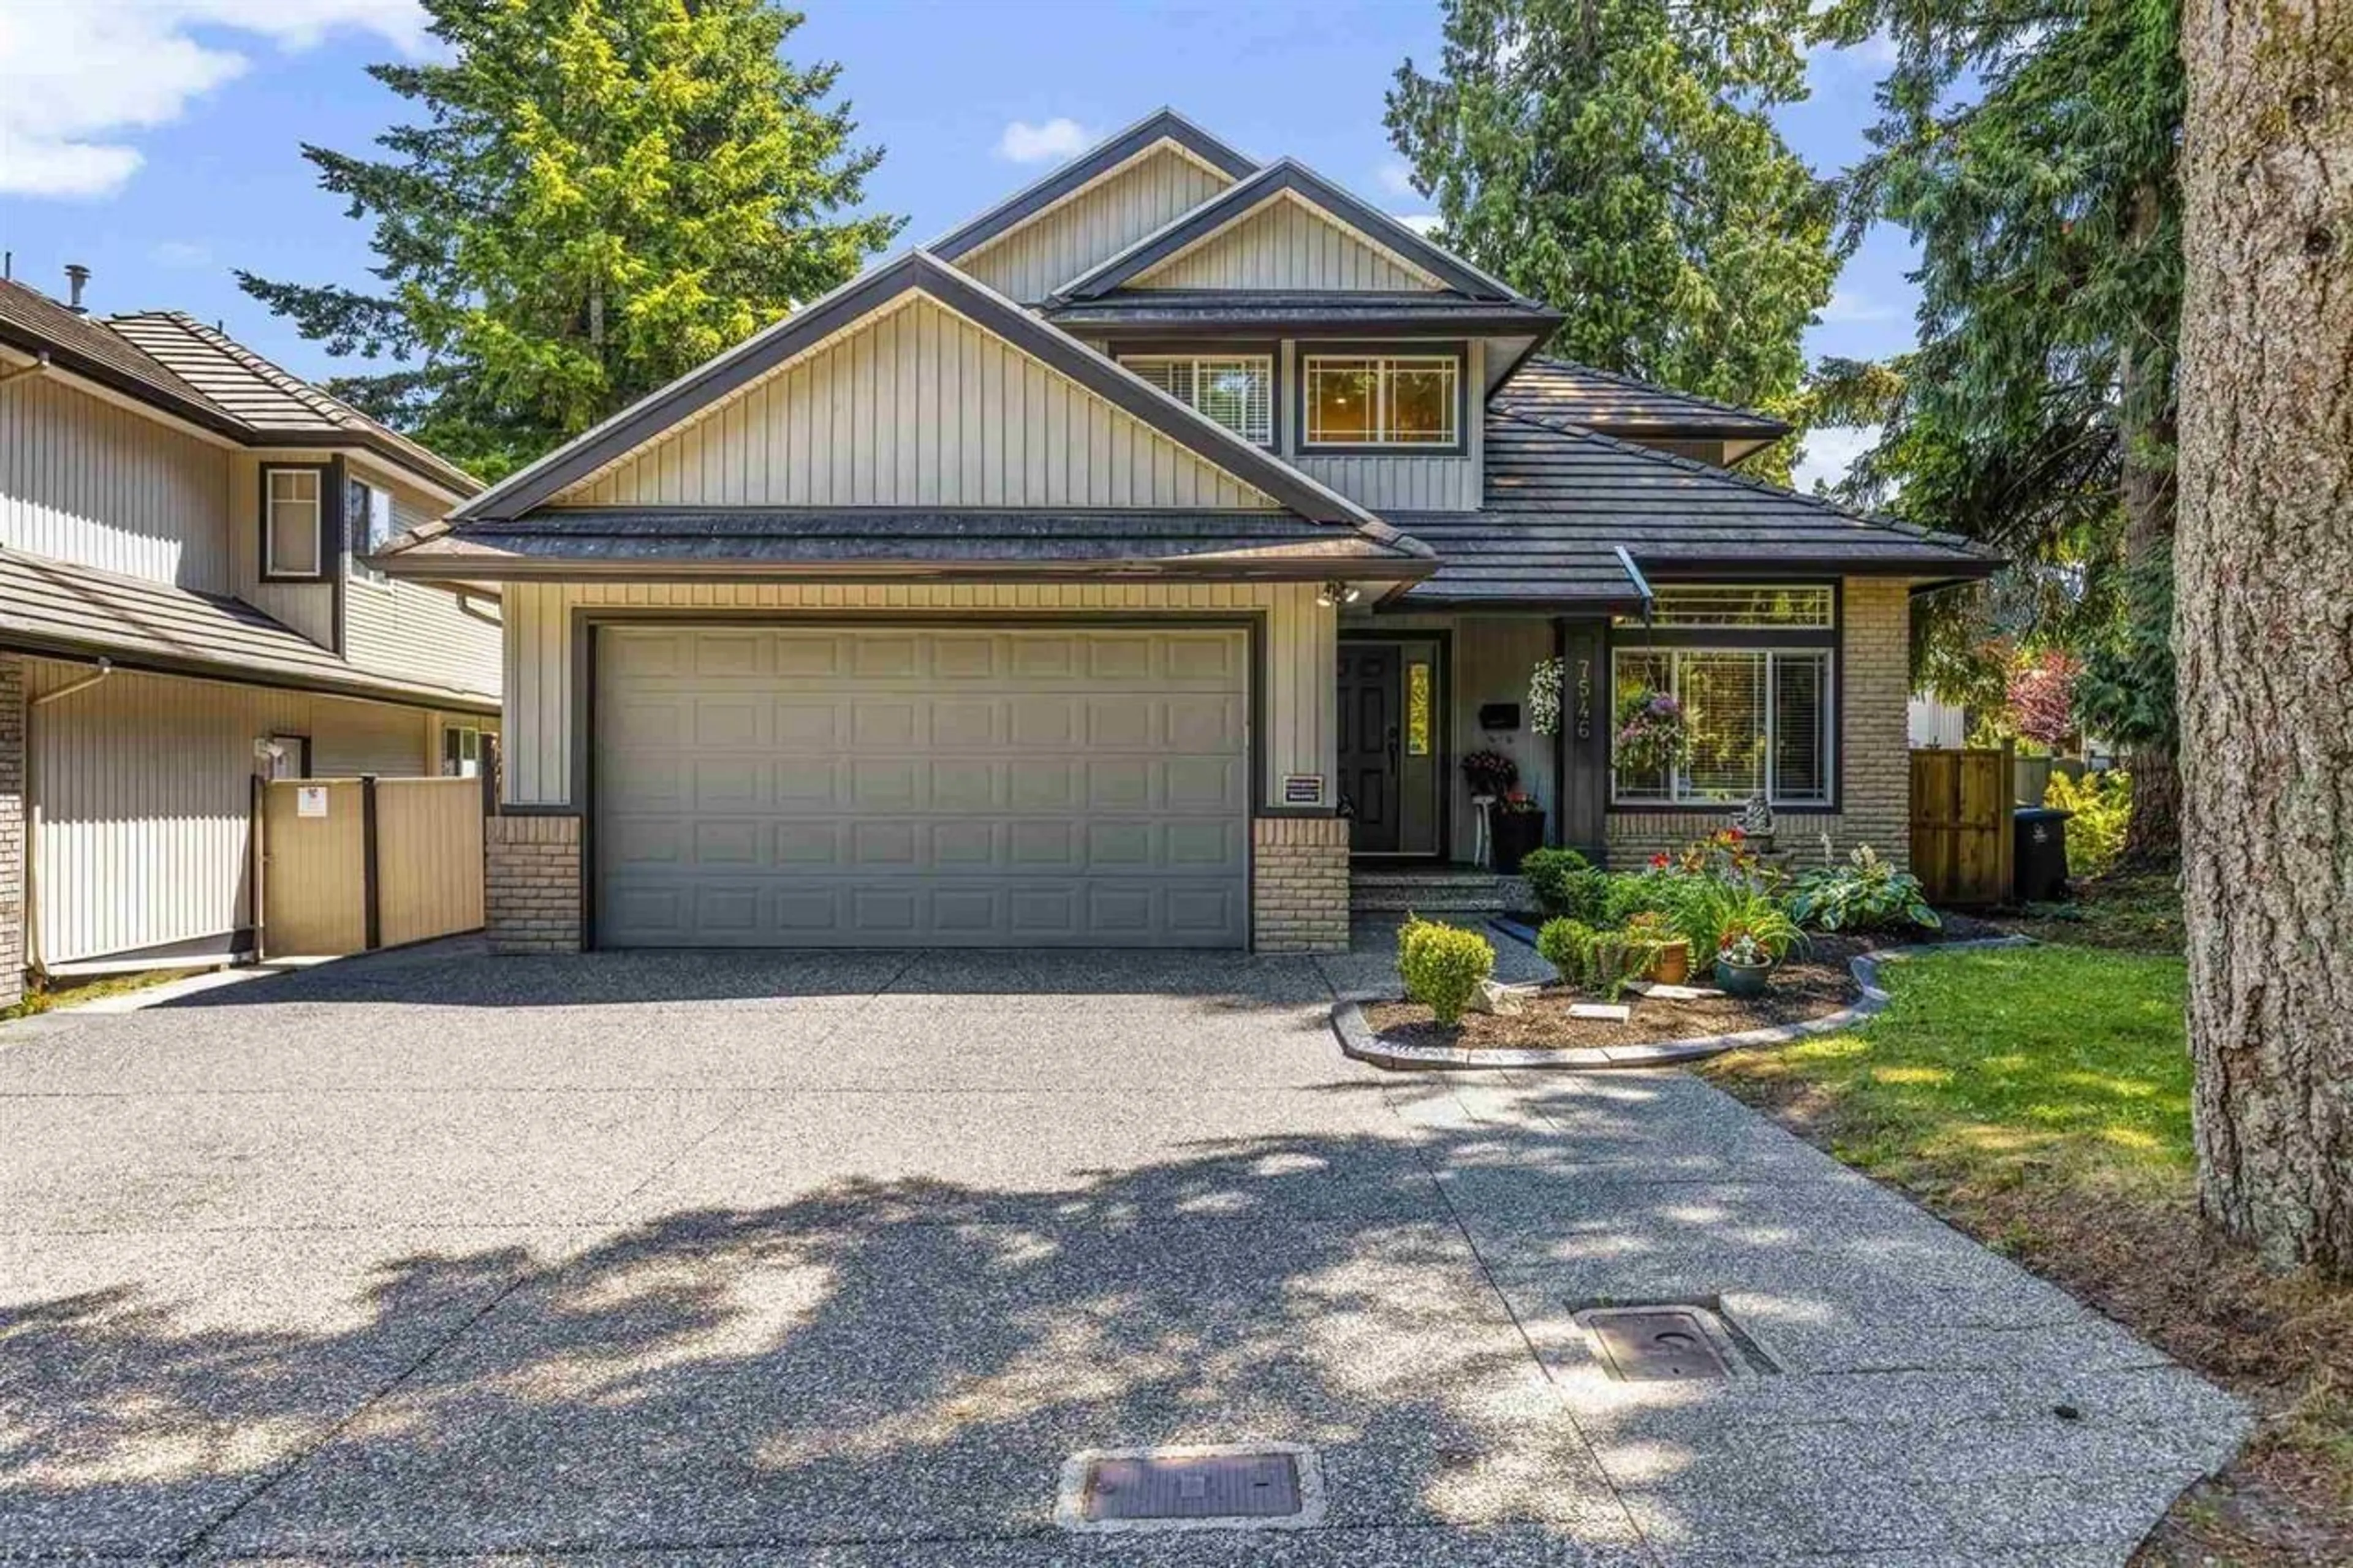 Home with vinyl exterior material for 7546 WILTSHIRE DRIVE, Surrey British Columbia V3S0T7